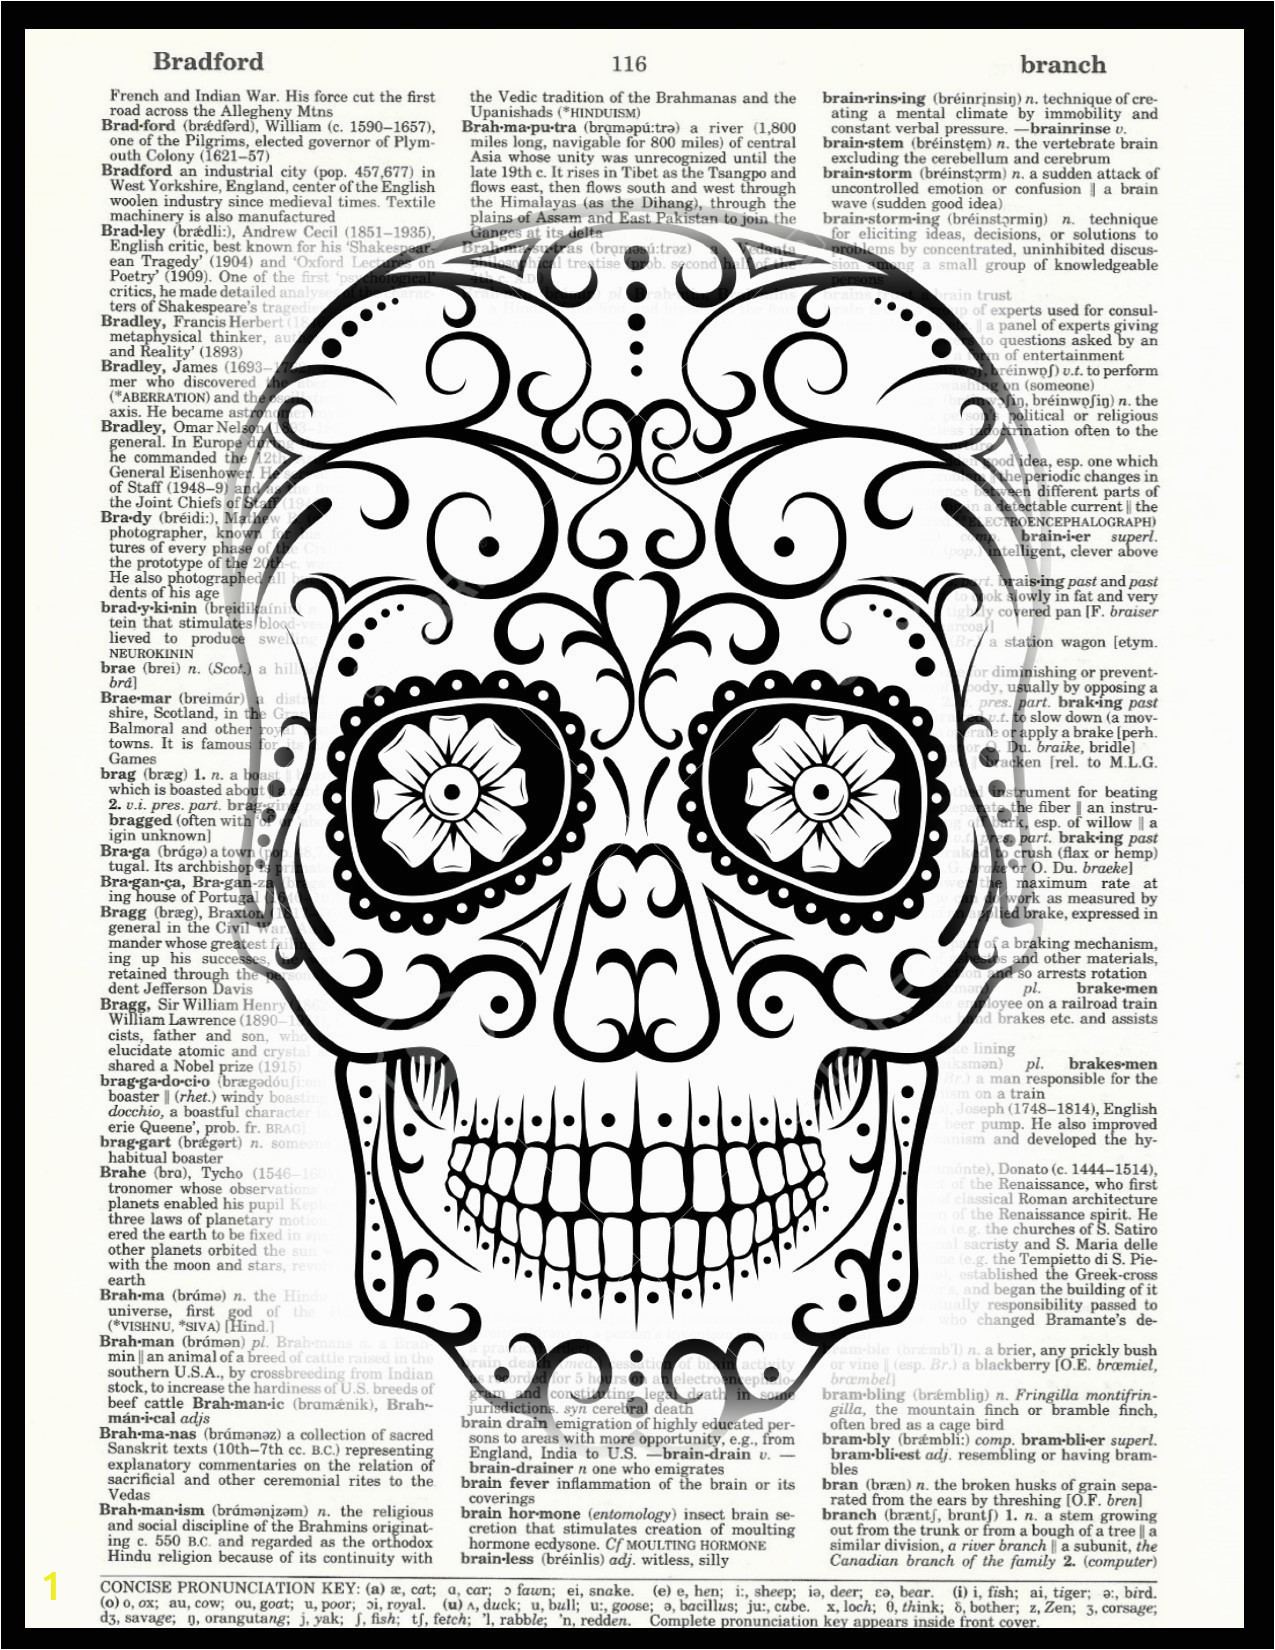 printablegar skull coloring pages for kids female book page buffalo template free design arts rock state park new york to city aquarium central terminal valley ranch